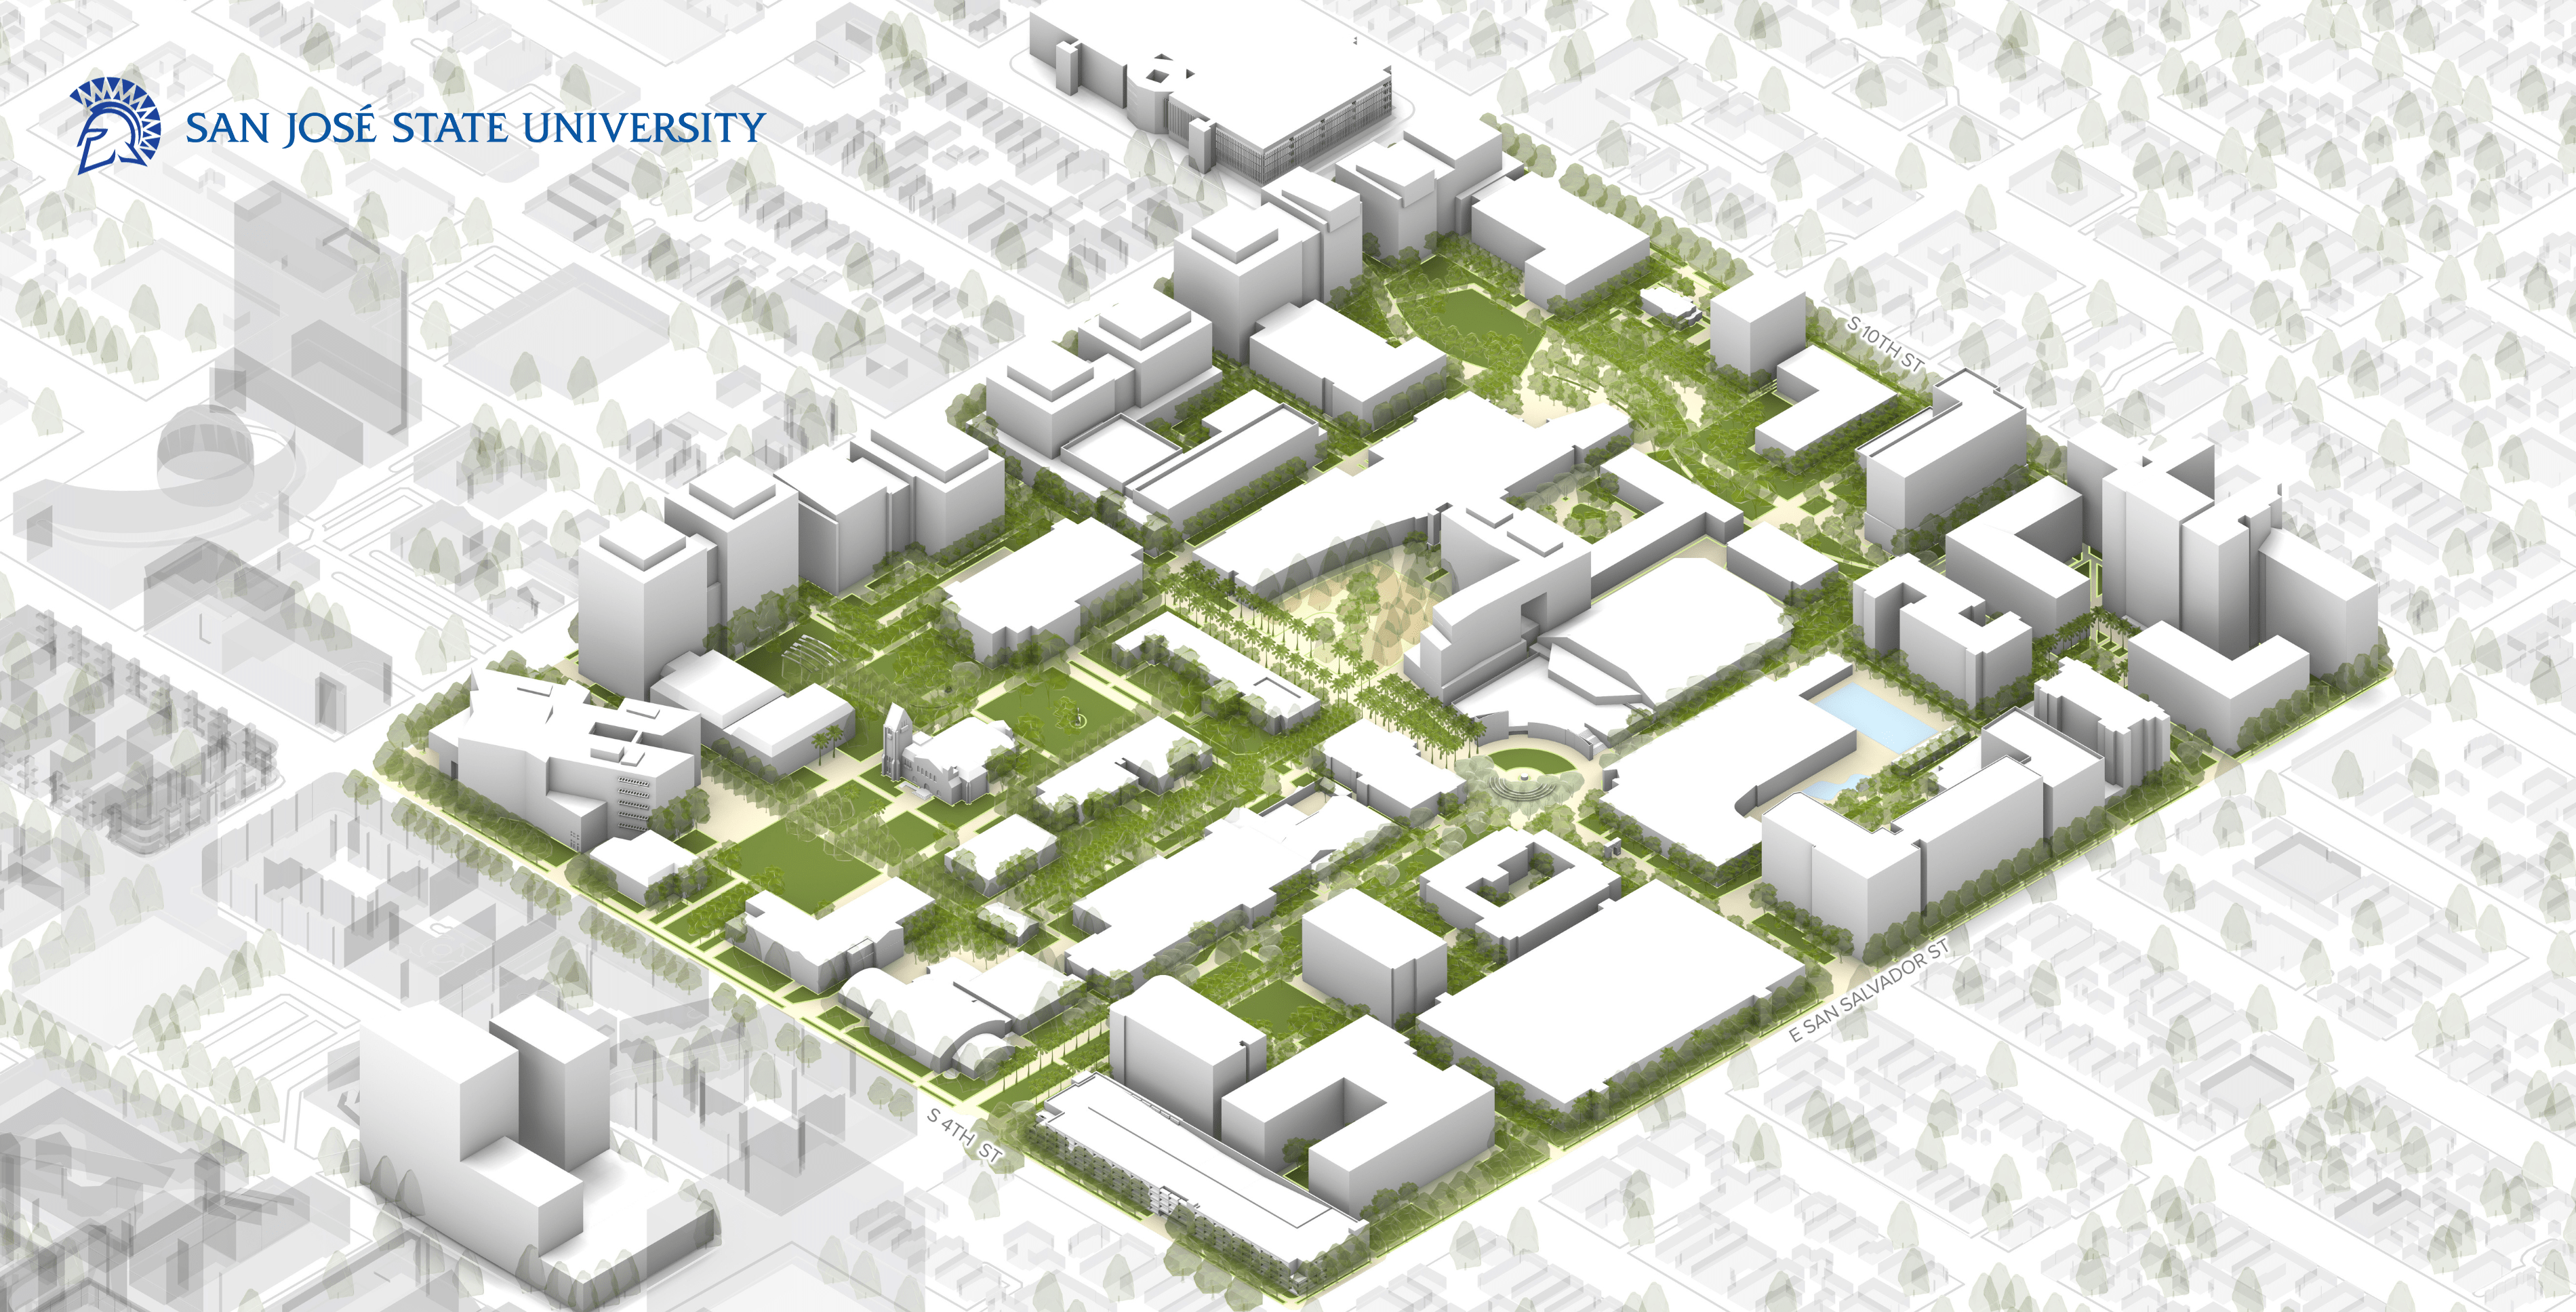 Aerial view of a rendering showing a reimagined main campus.